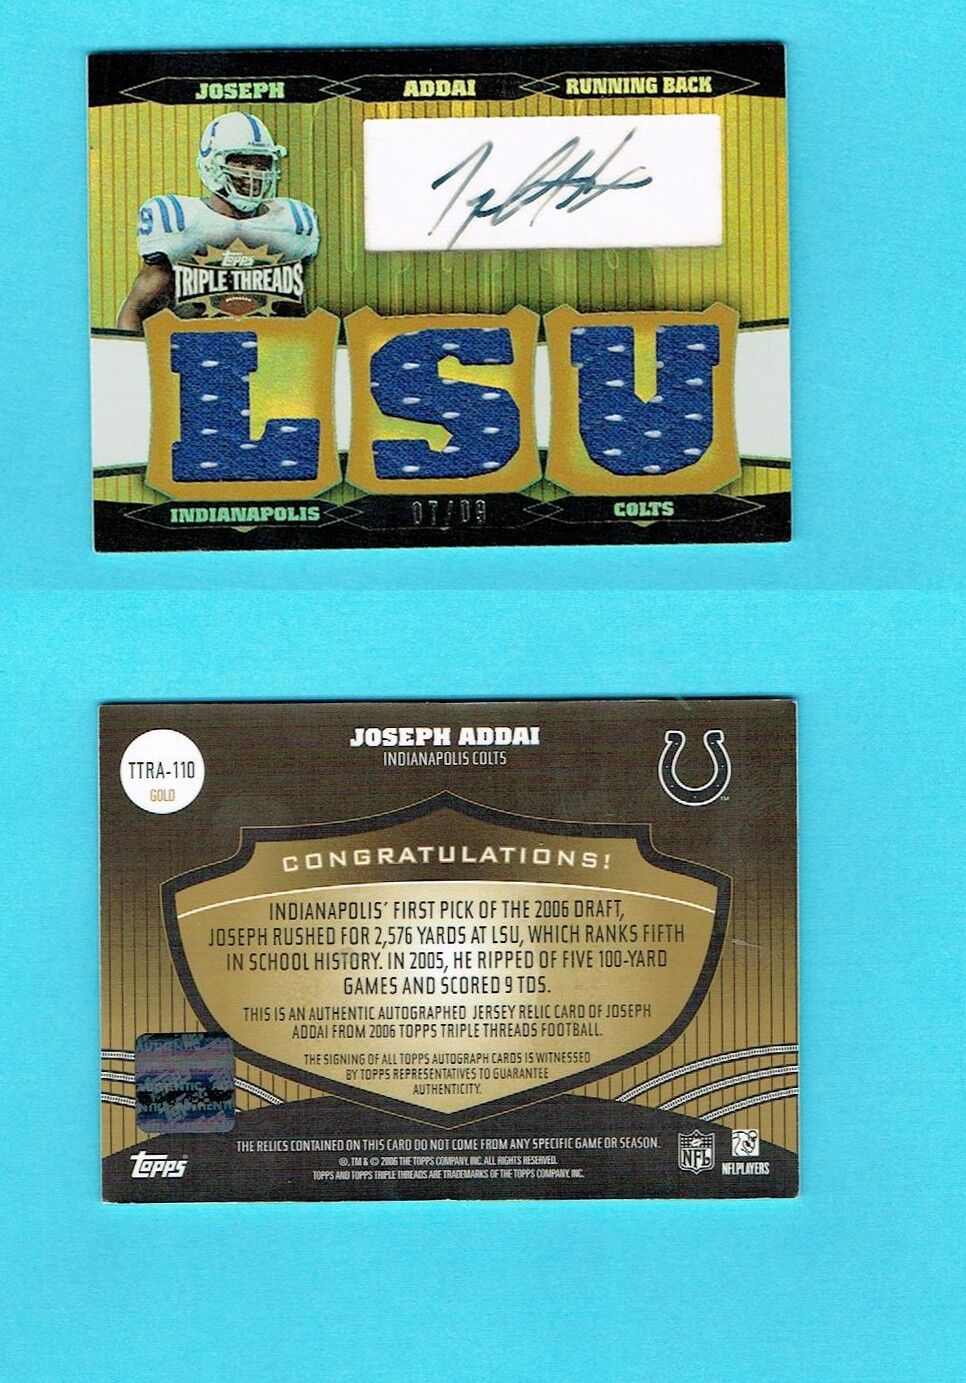 2006 TRIPLE THREADS JOSEPH ADDAI AUTO JERSEY ROOKIE CARD # 7/9 signed  colts  Image 3